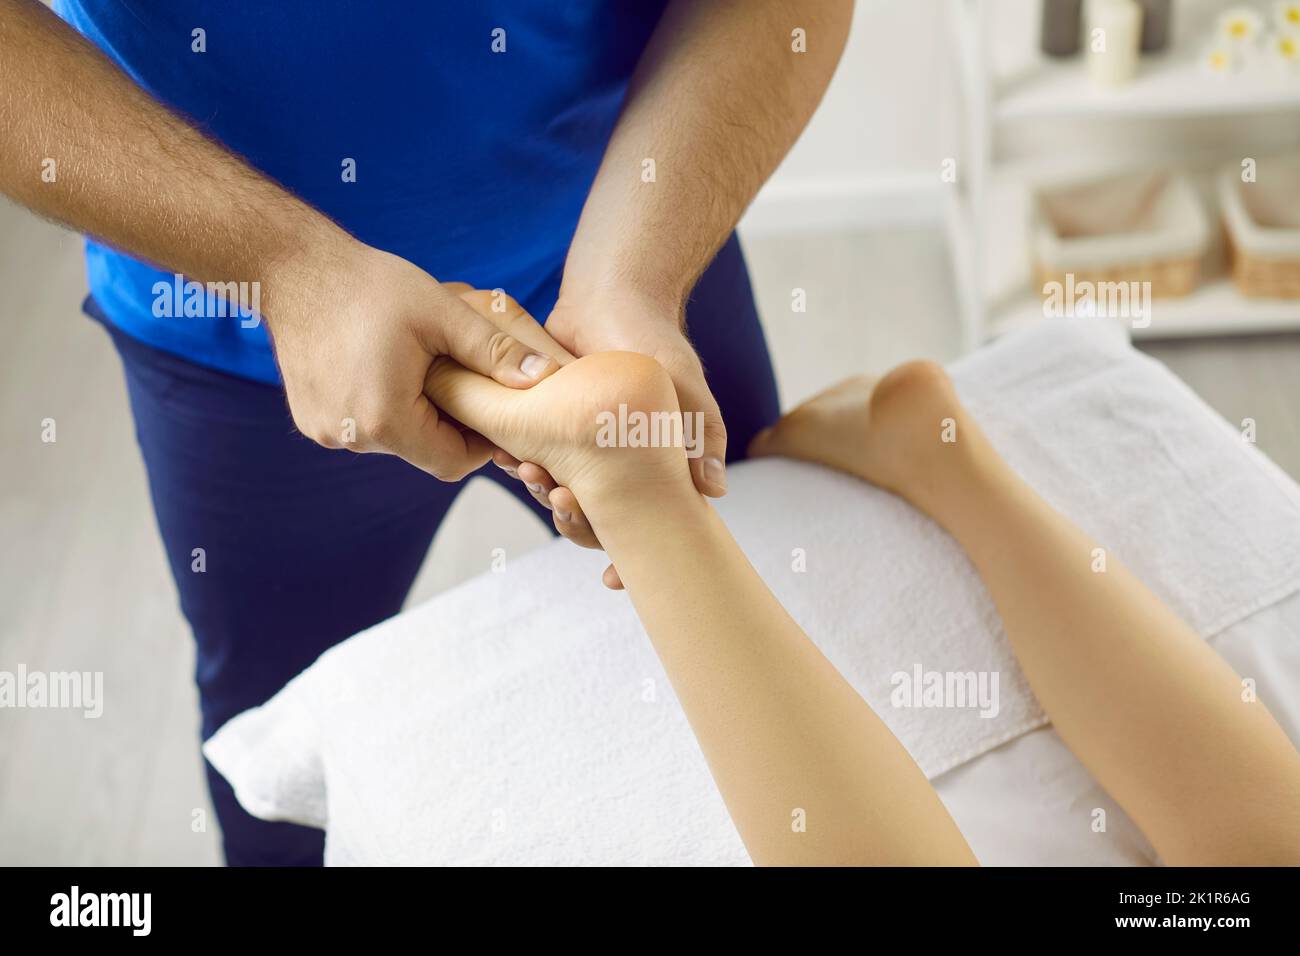 Male masseur with hands makes acupressure on legs of young woman in modern massage parlor. Stock Photo